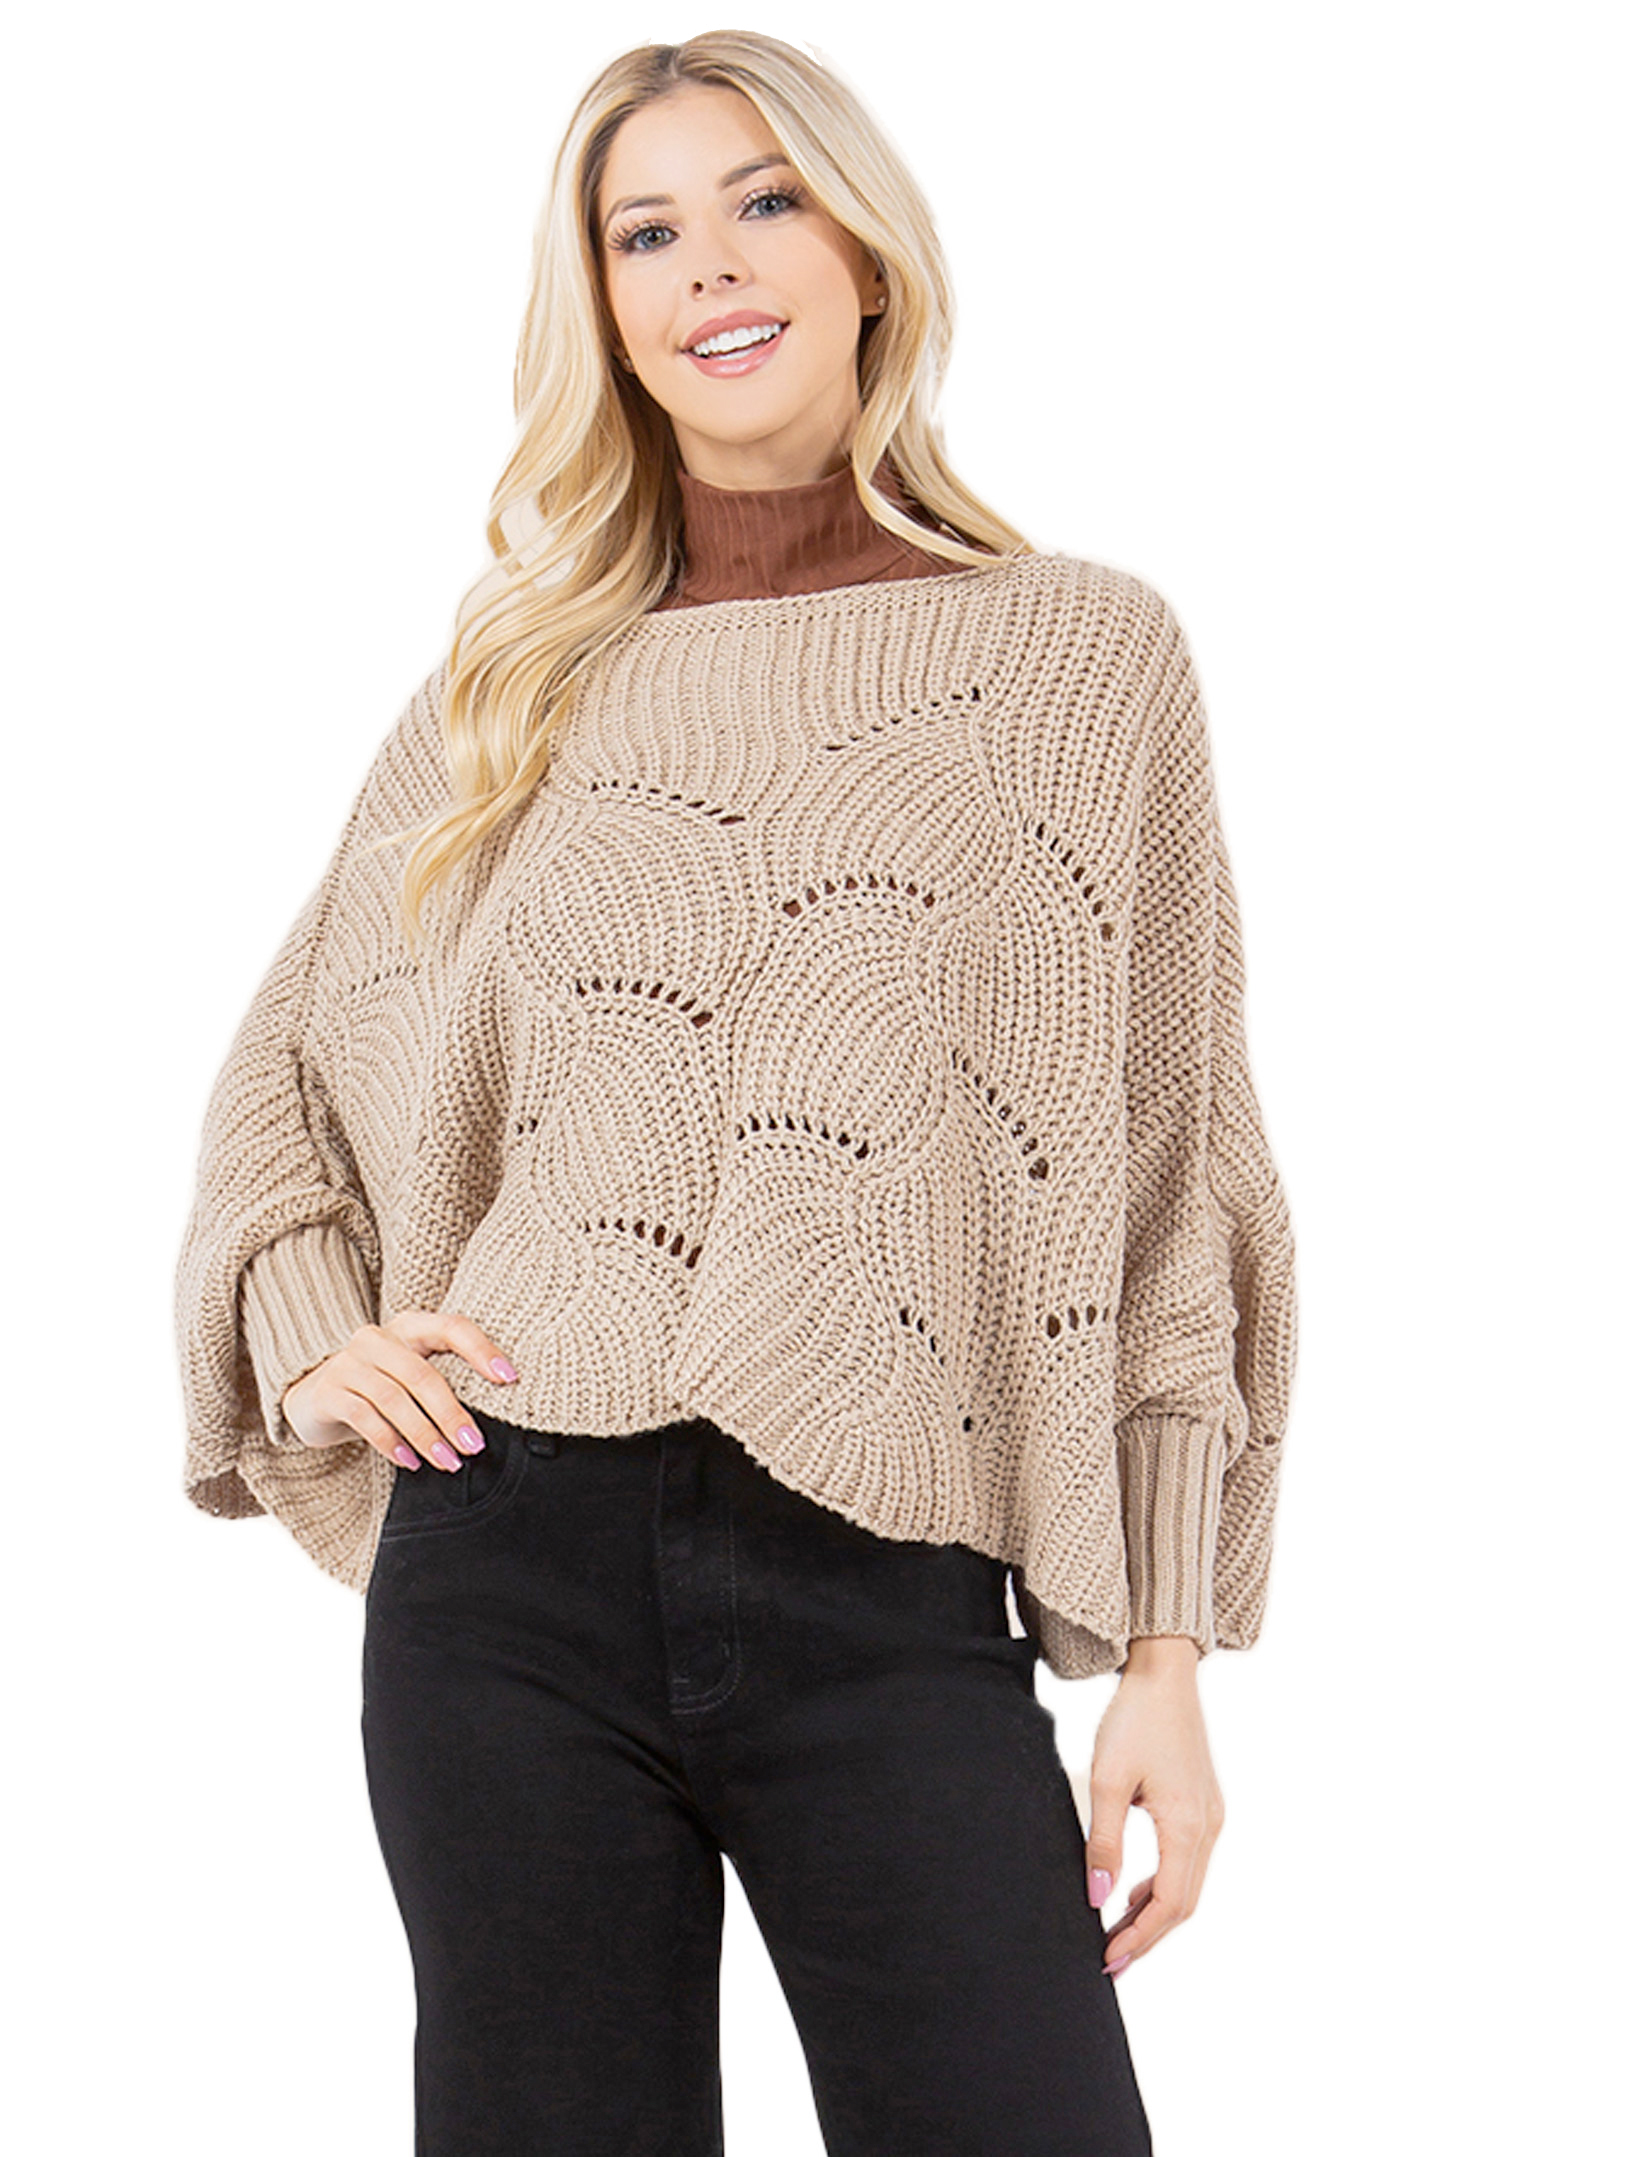 wholesale 4271 - Sweater Poncho w/ Sleeves